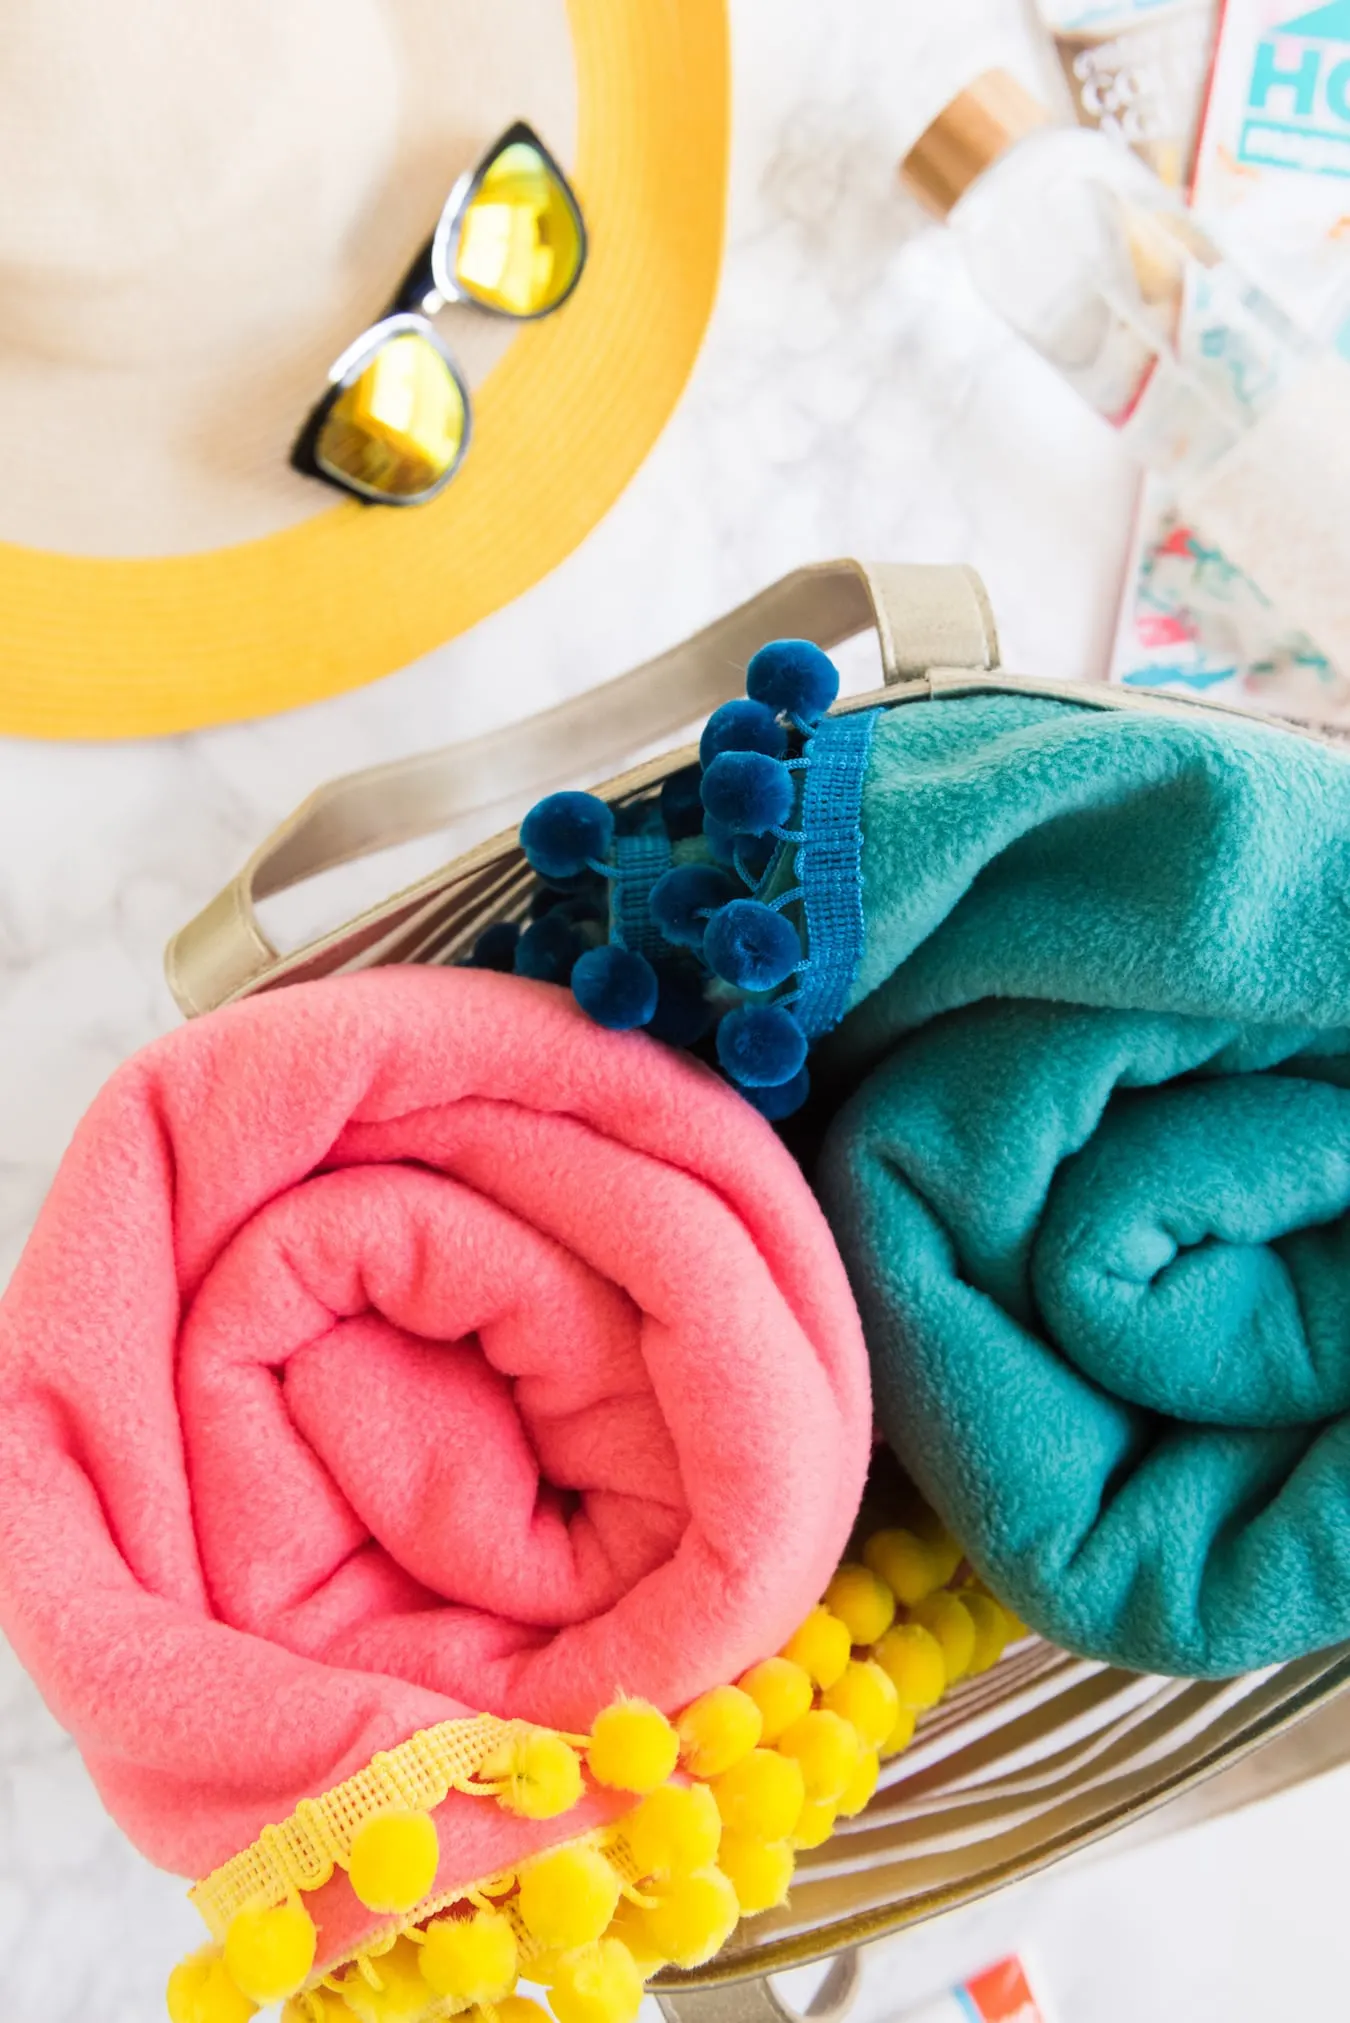 How to make a no-sew blanket! Find the tutorial for these colorful pom pom picnic blankets from @cydconverse! | Click through for more fun summer ideas, entertaining tips, party ideas, recipes, crafts and more!